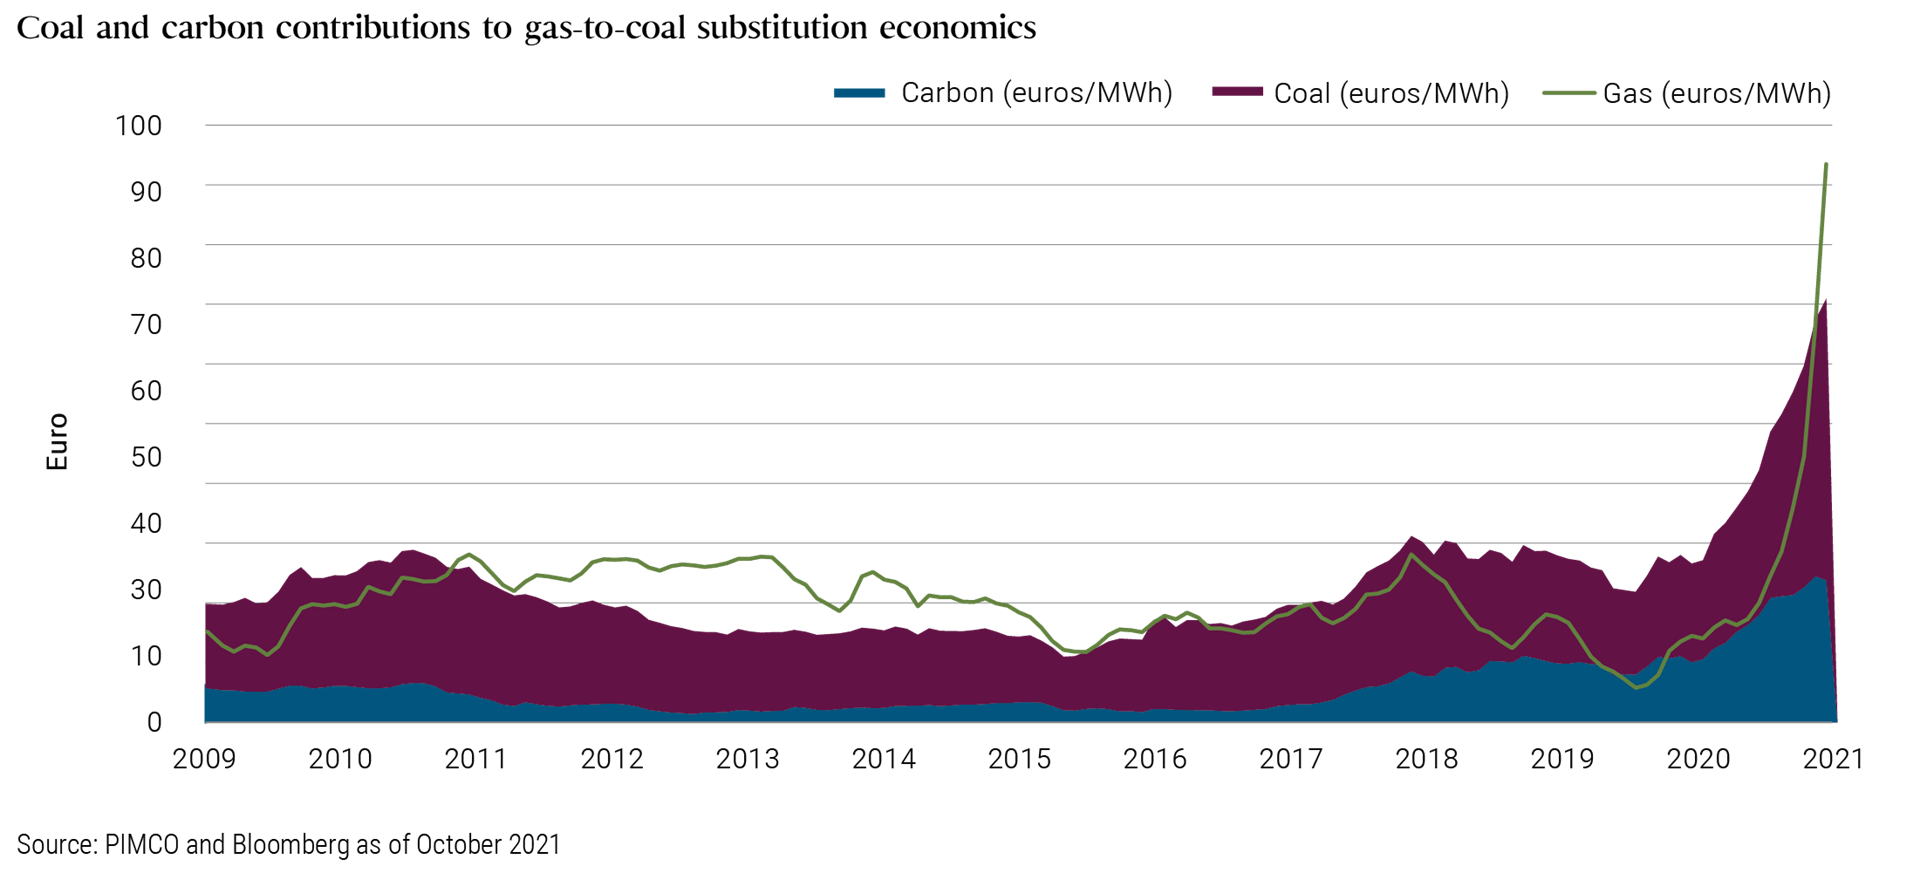 This graph tracks coal and carbon contributions to gas-to-coal substitution economics for the period from 2009 to October 2021. Measured in euros/megawatt hours, carbon, coal and gas all moved dramatically upward starting in 2020, with coal making up the bulk of the increase. Data provided by PIMCO and Bloomberg.